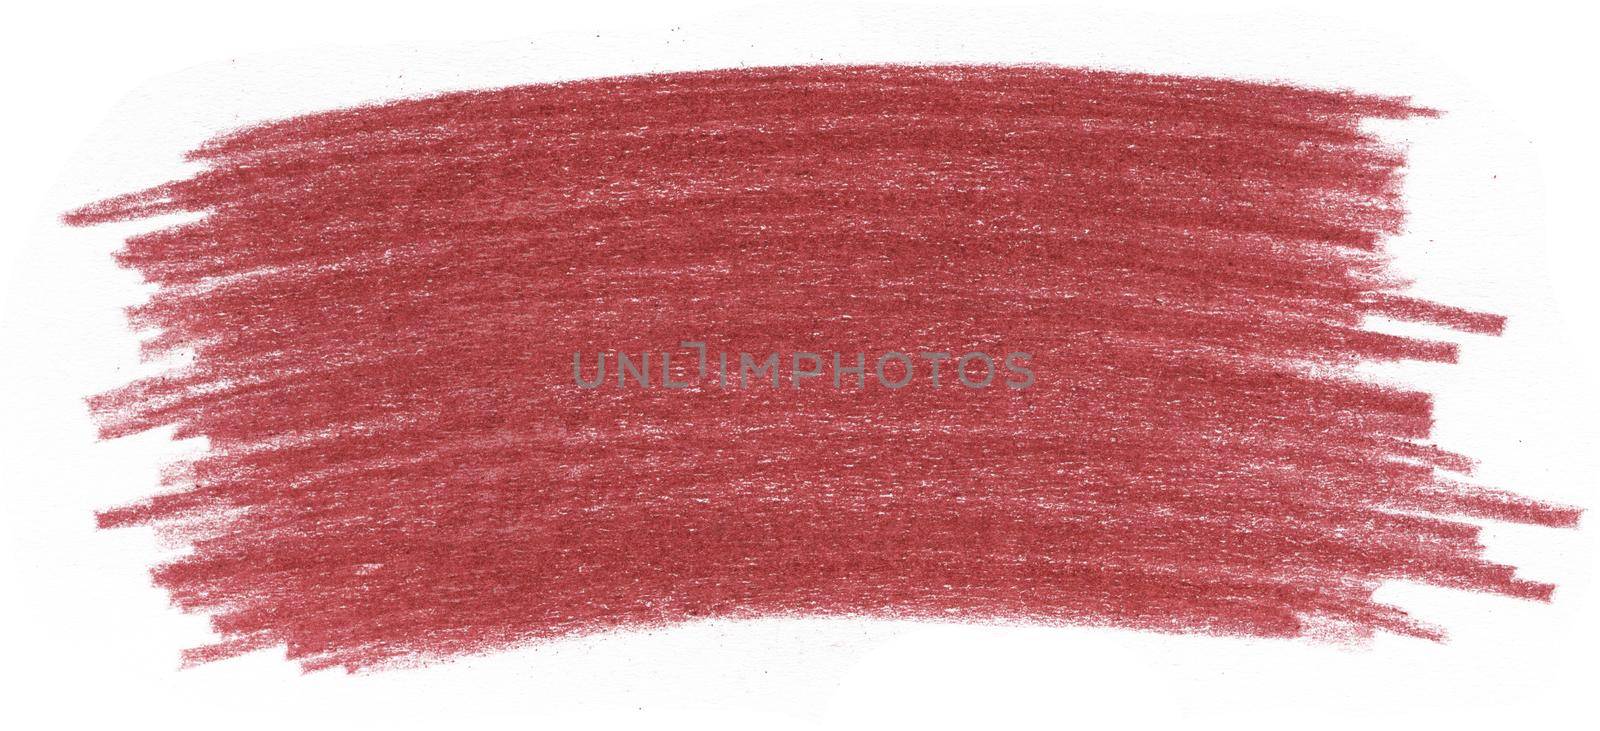 Abstract Stain Drawn by Colored Pencil Isolated on White Background. by Rina_Dozornaya